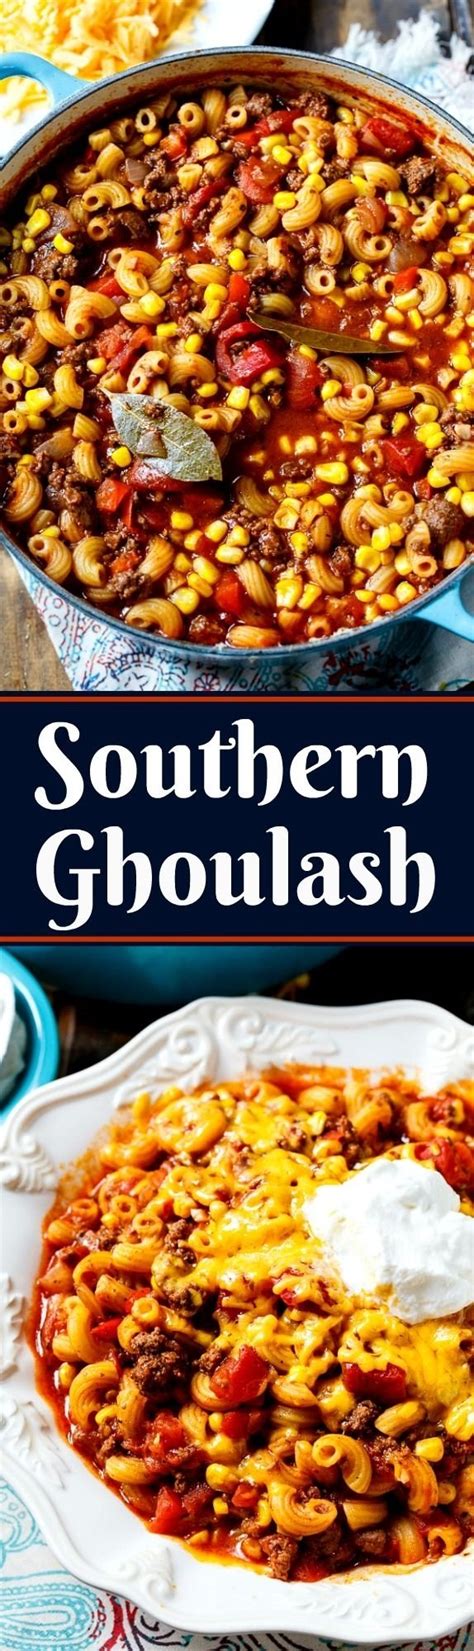 62 delicious easter dinner ideas the whole family will love. 10 Best Quick Soul Food Dinner Ideas 2020